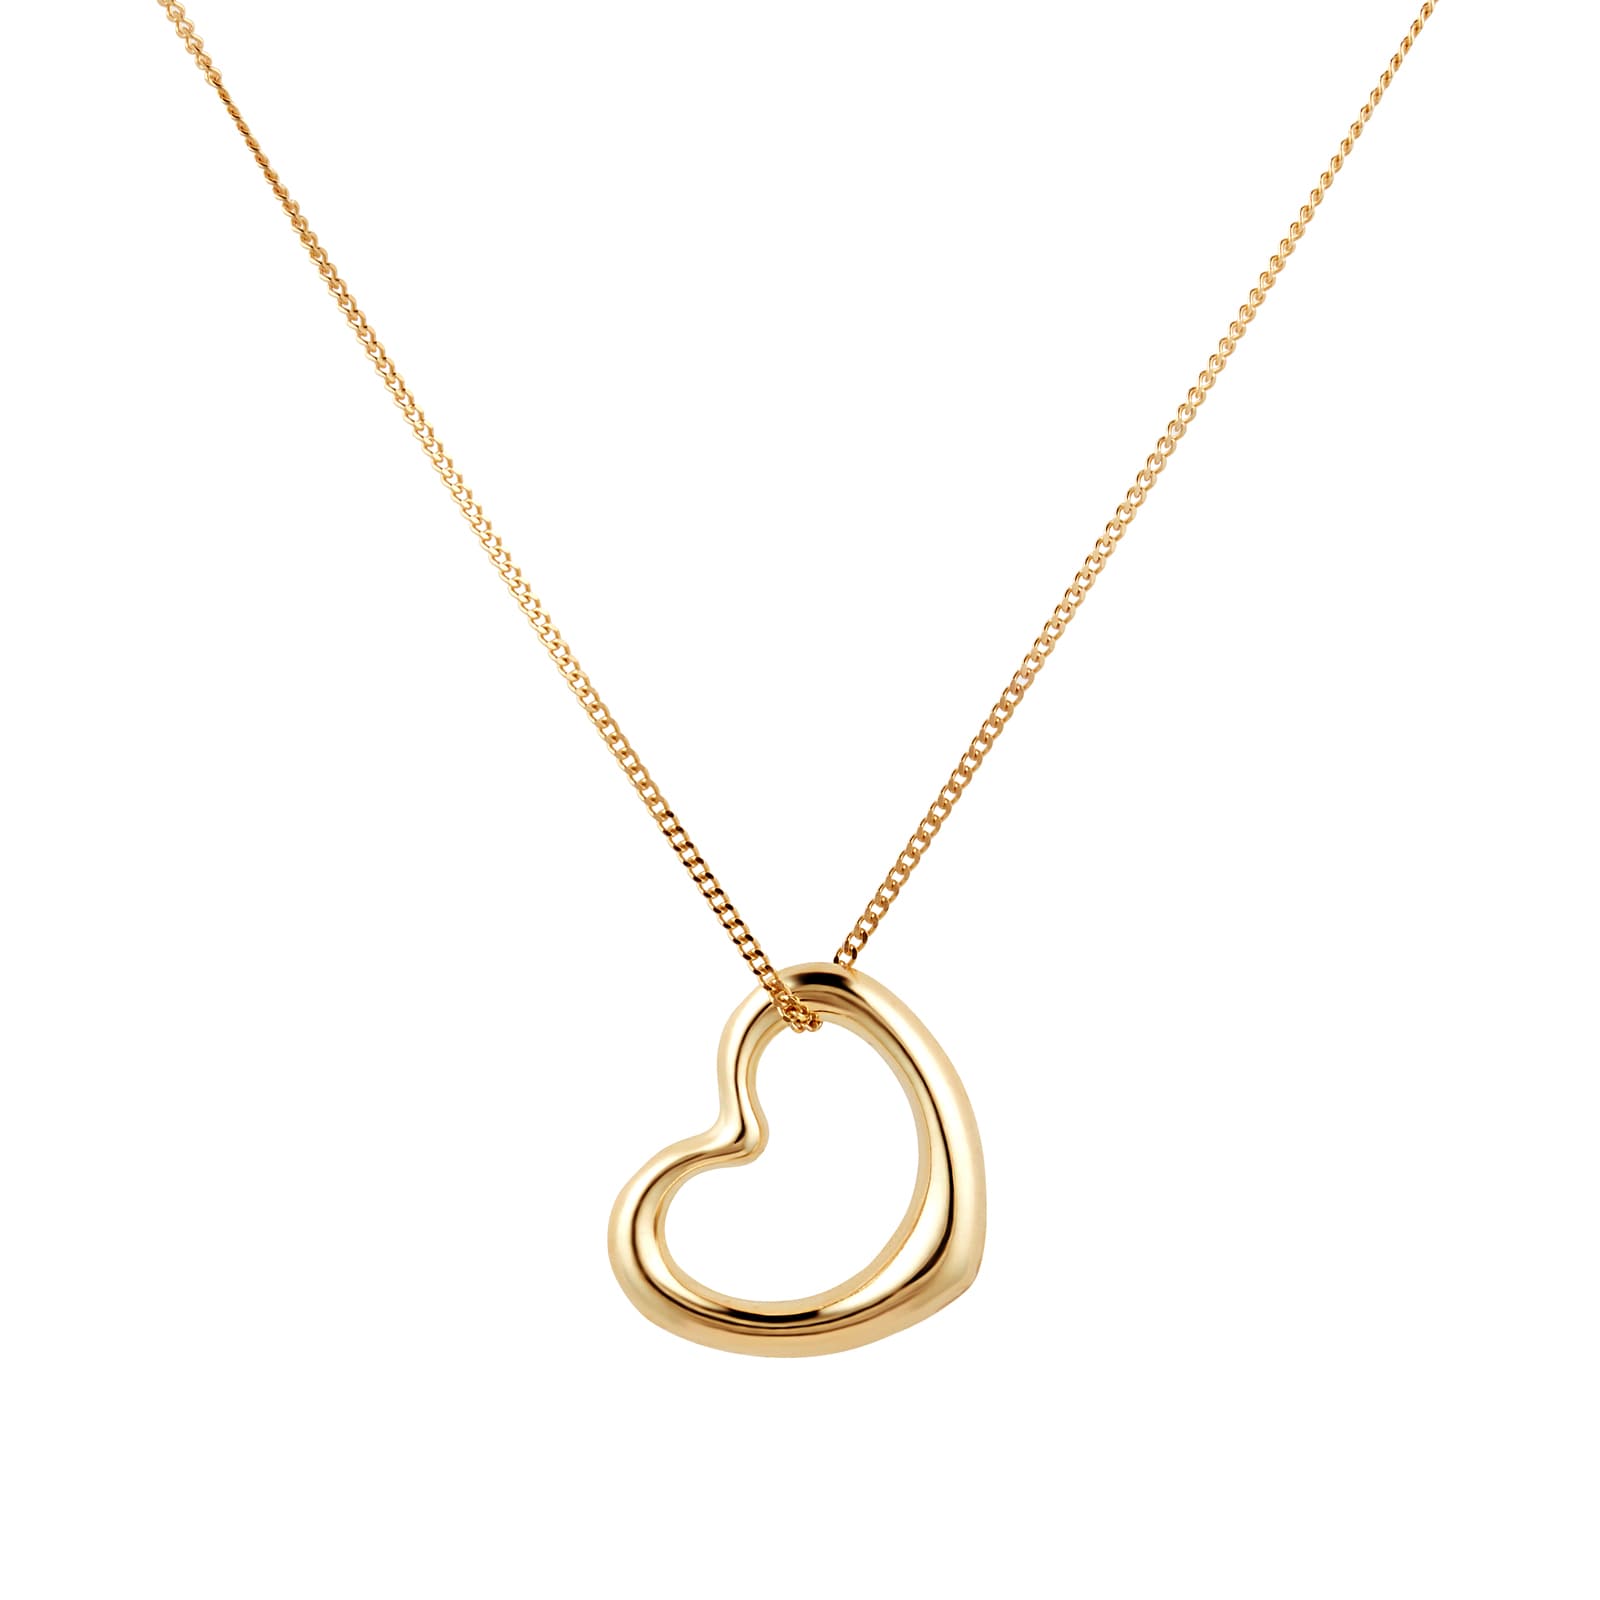 18ct Yellow Gold Open Heart Floating Pendant